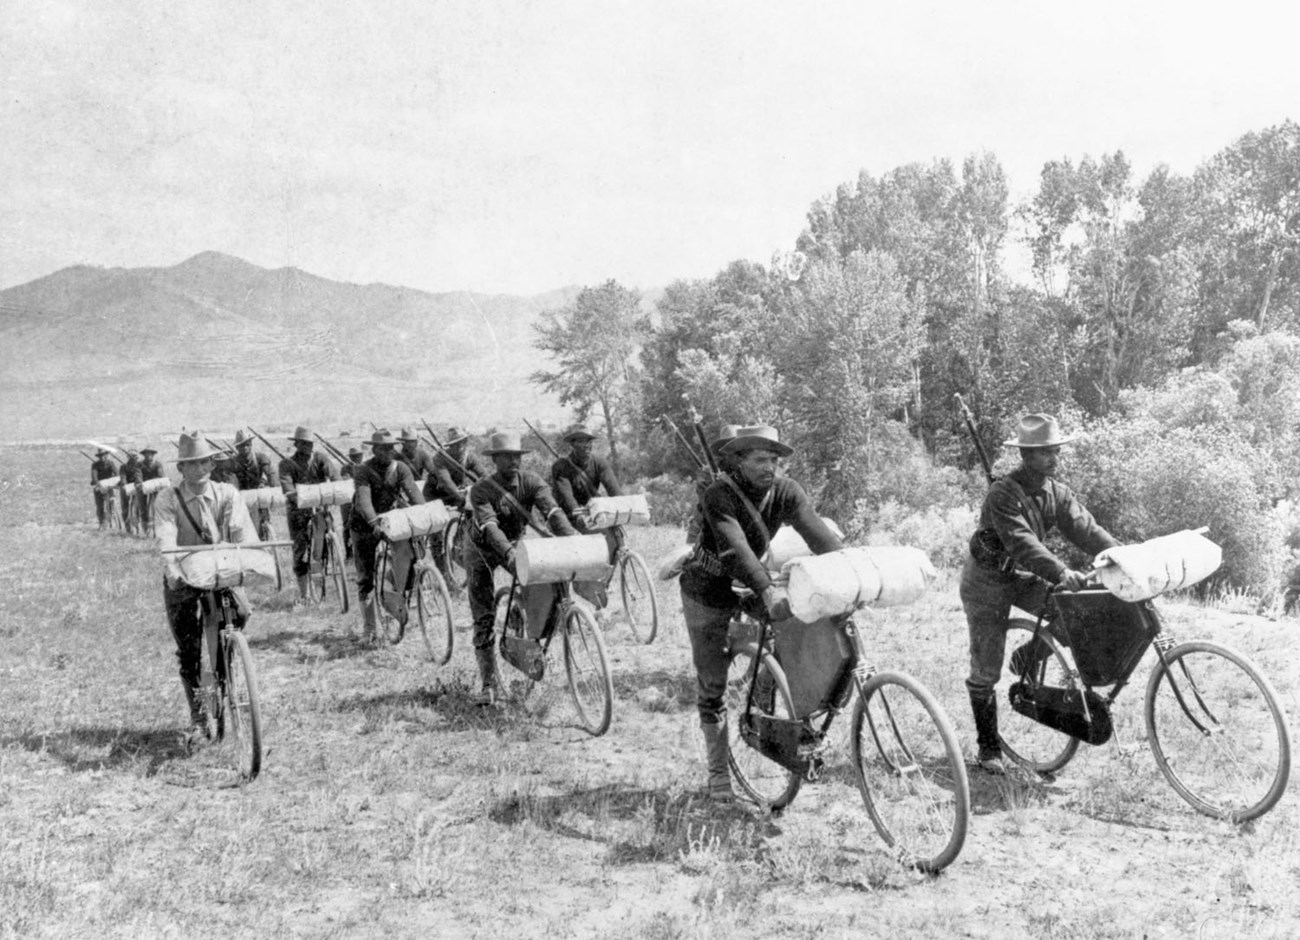 Group of male soldiers riding bicycles in a mountain area